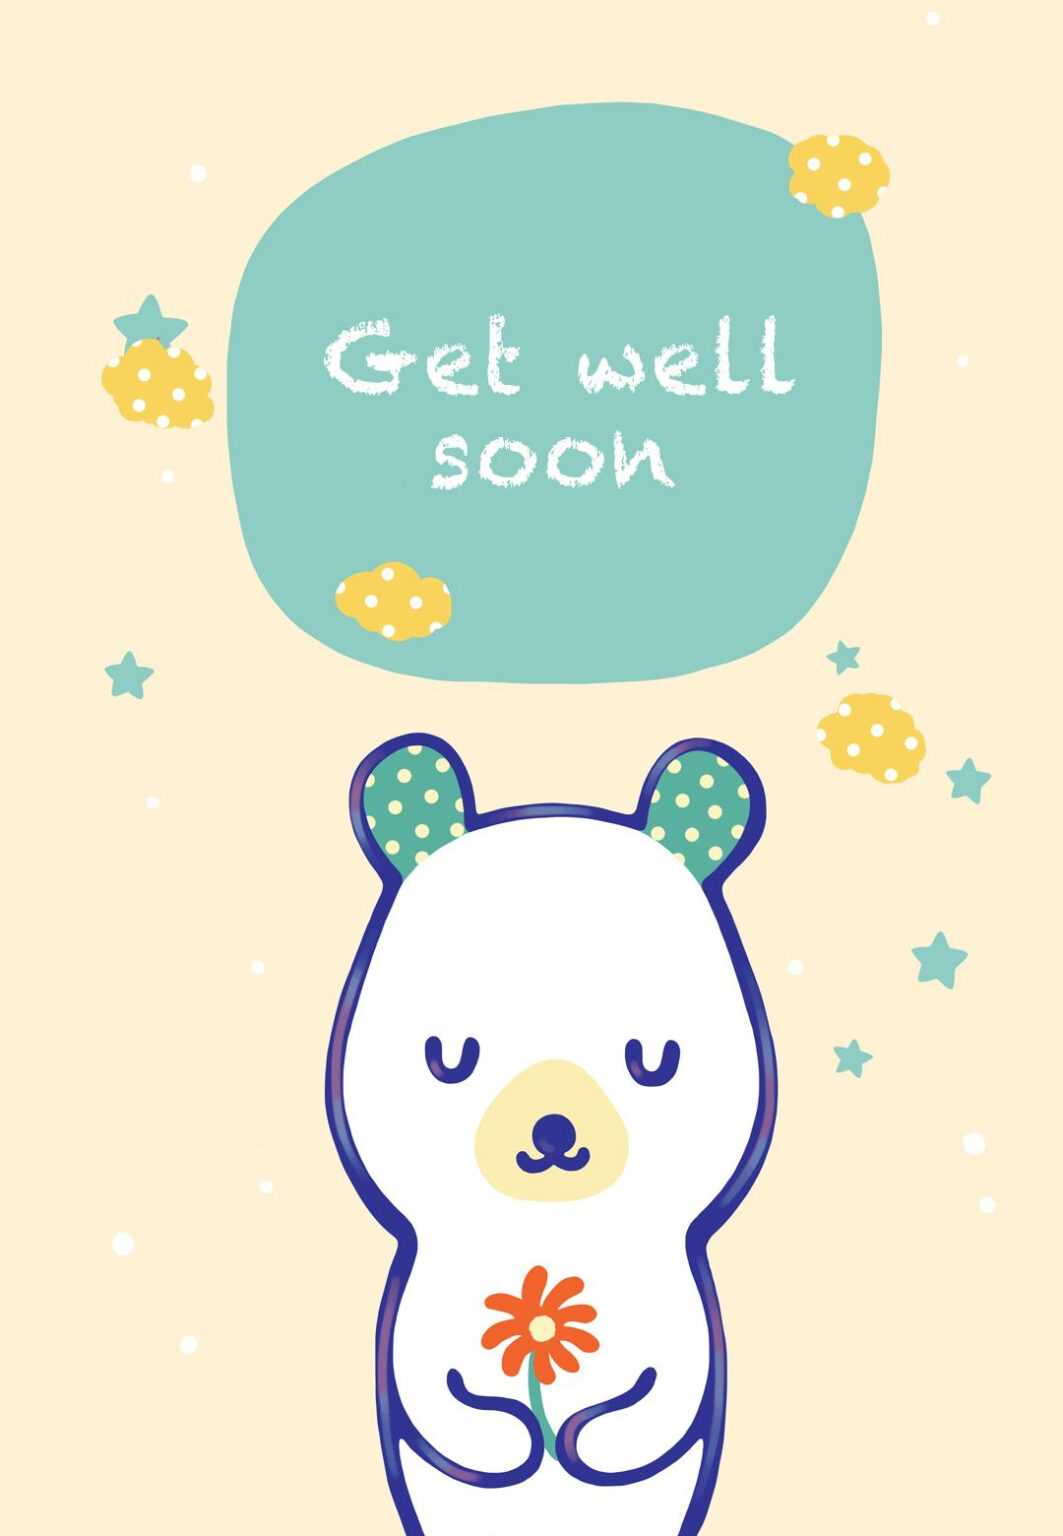 free-printable-get-well-teddy-bear-greeting-card-get-well-throughout-get-well-soon-card-template